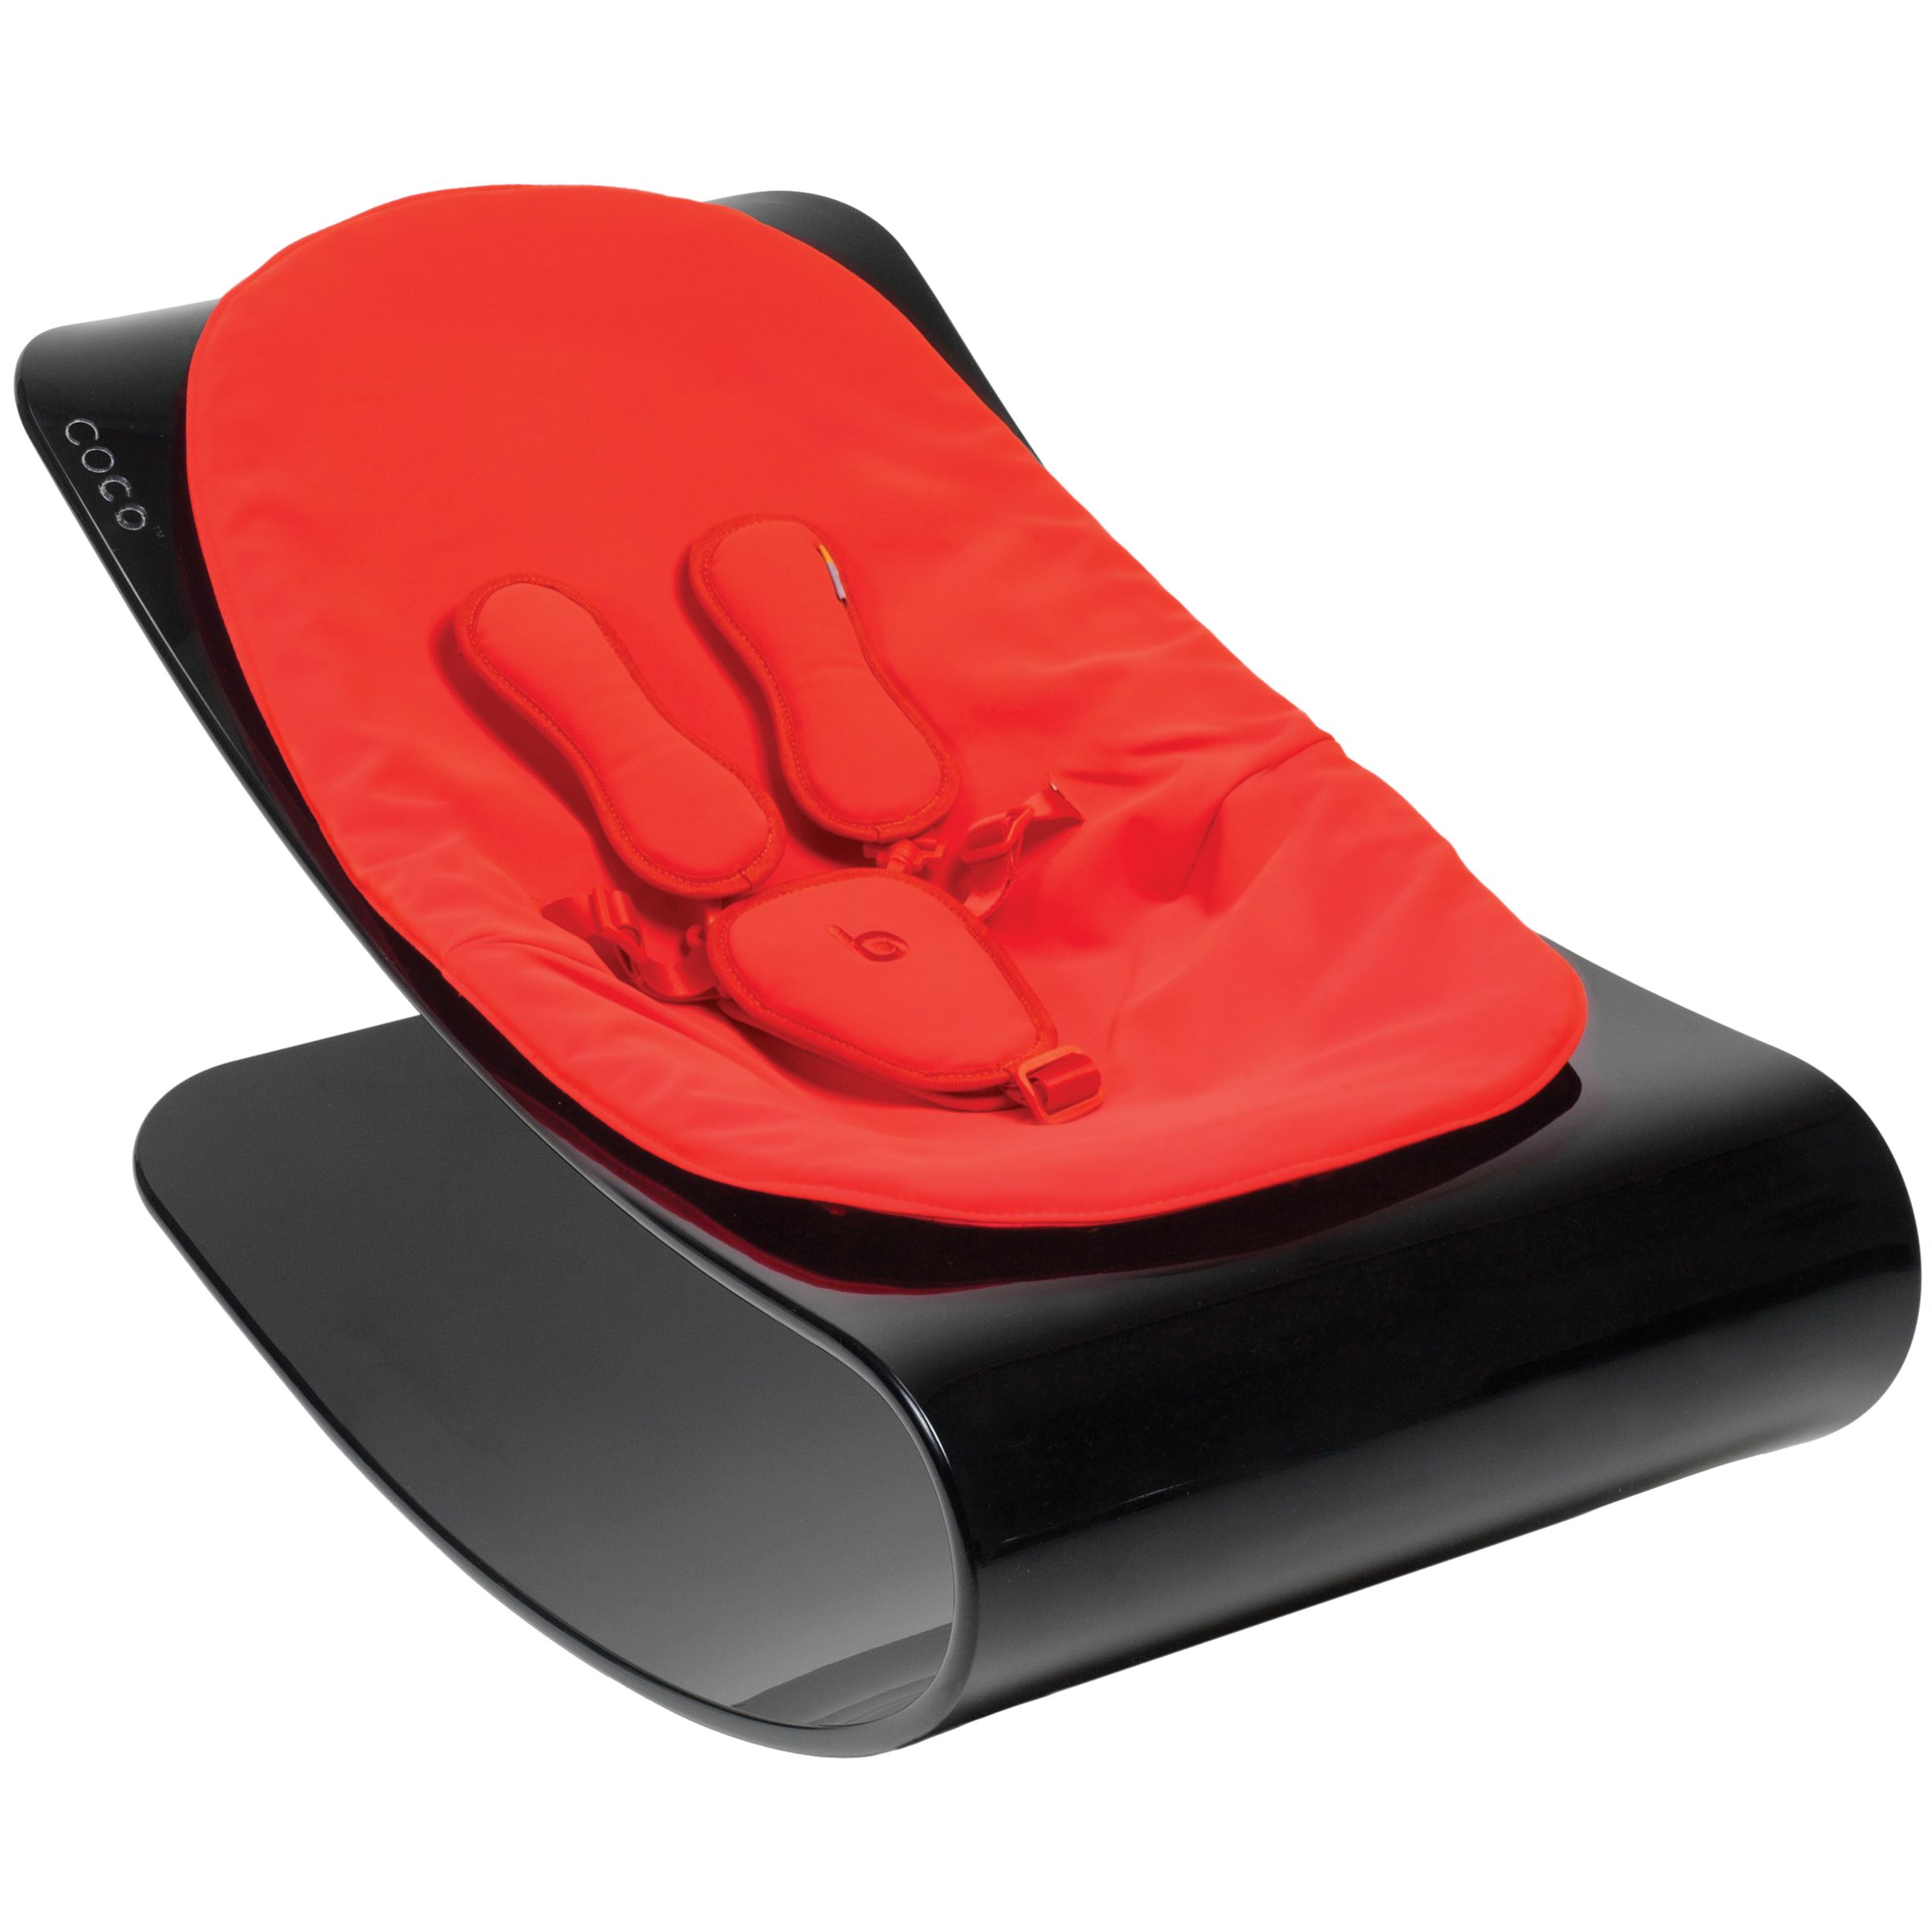 bloom Coco Plexistyle Baby Lounger, Ebony Black with Rock Red at John Lewis